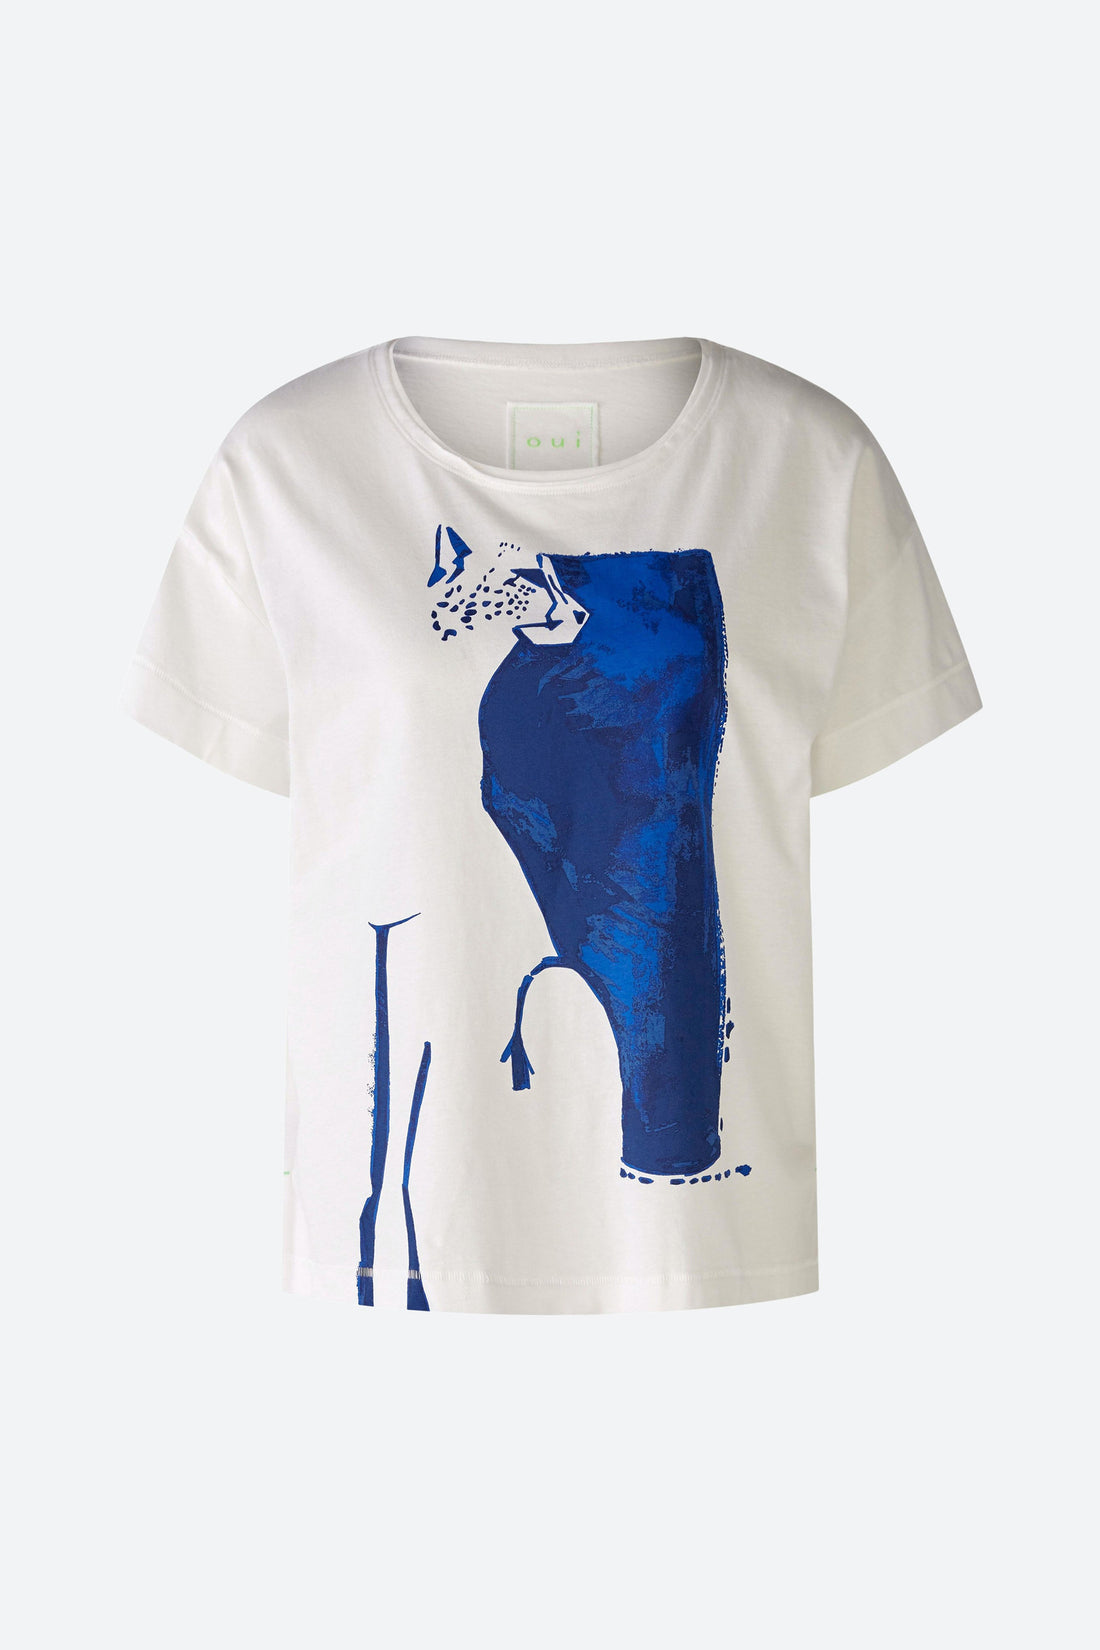 T-Shirt Oversized Made From 100% Organic Cotton_79355_1006_01